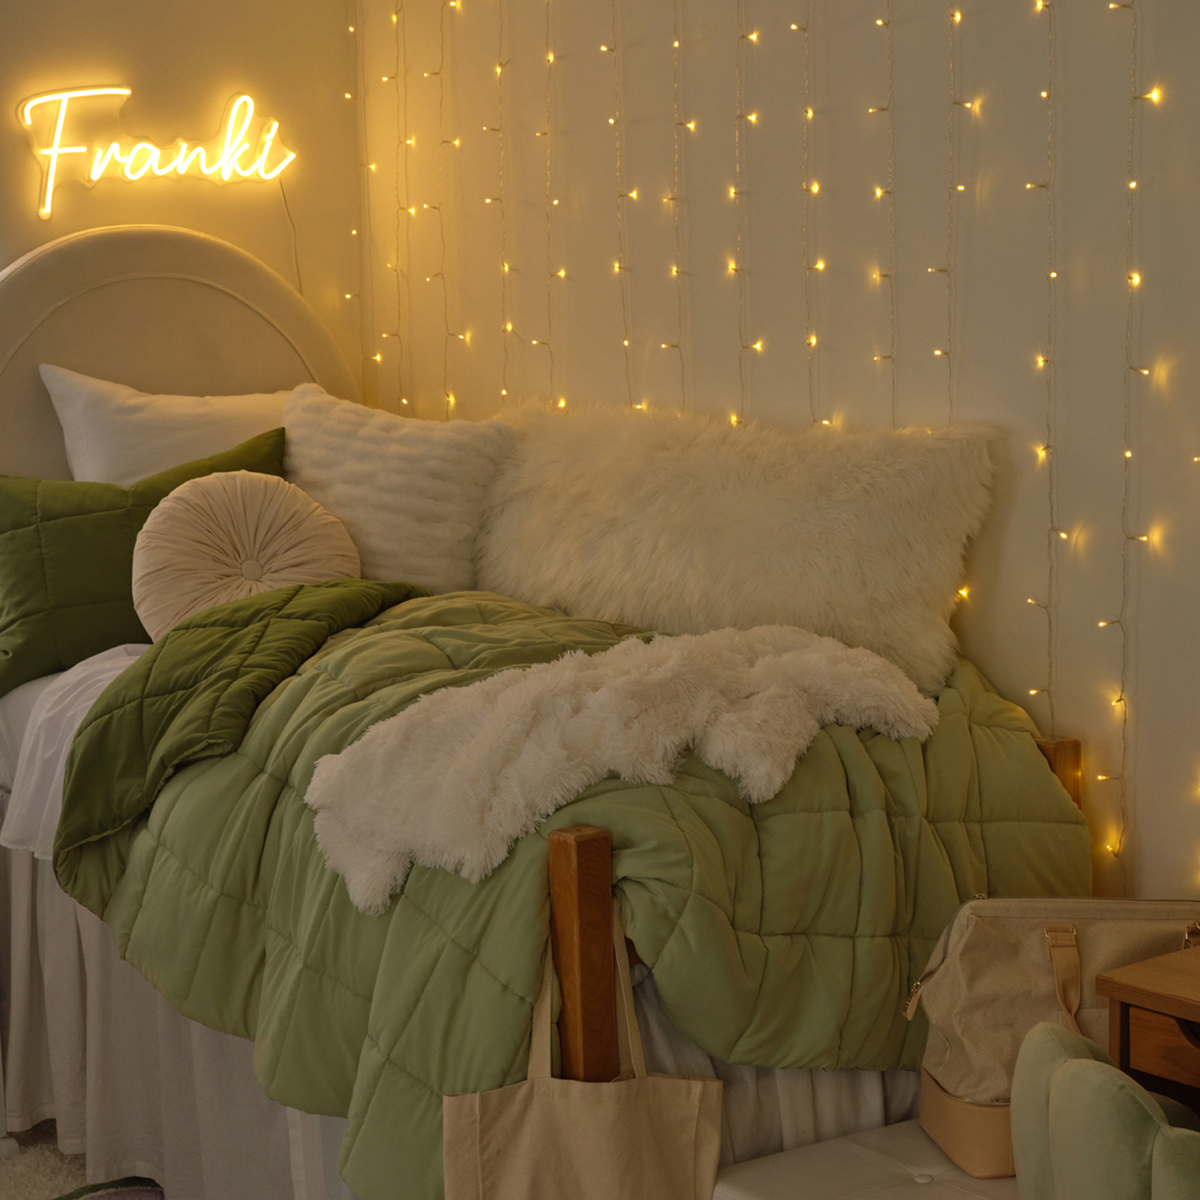 Dormify Curtain String Lights | The Container Store